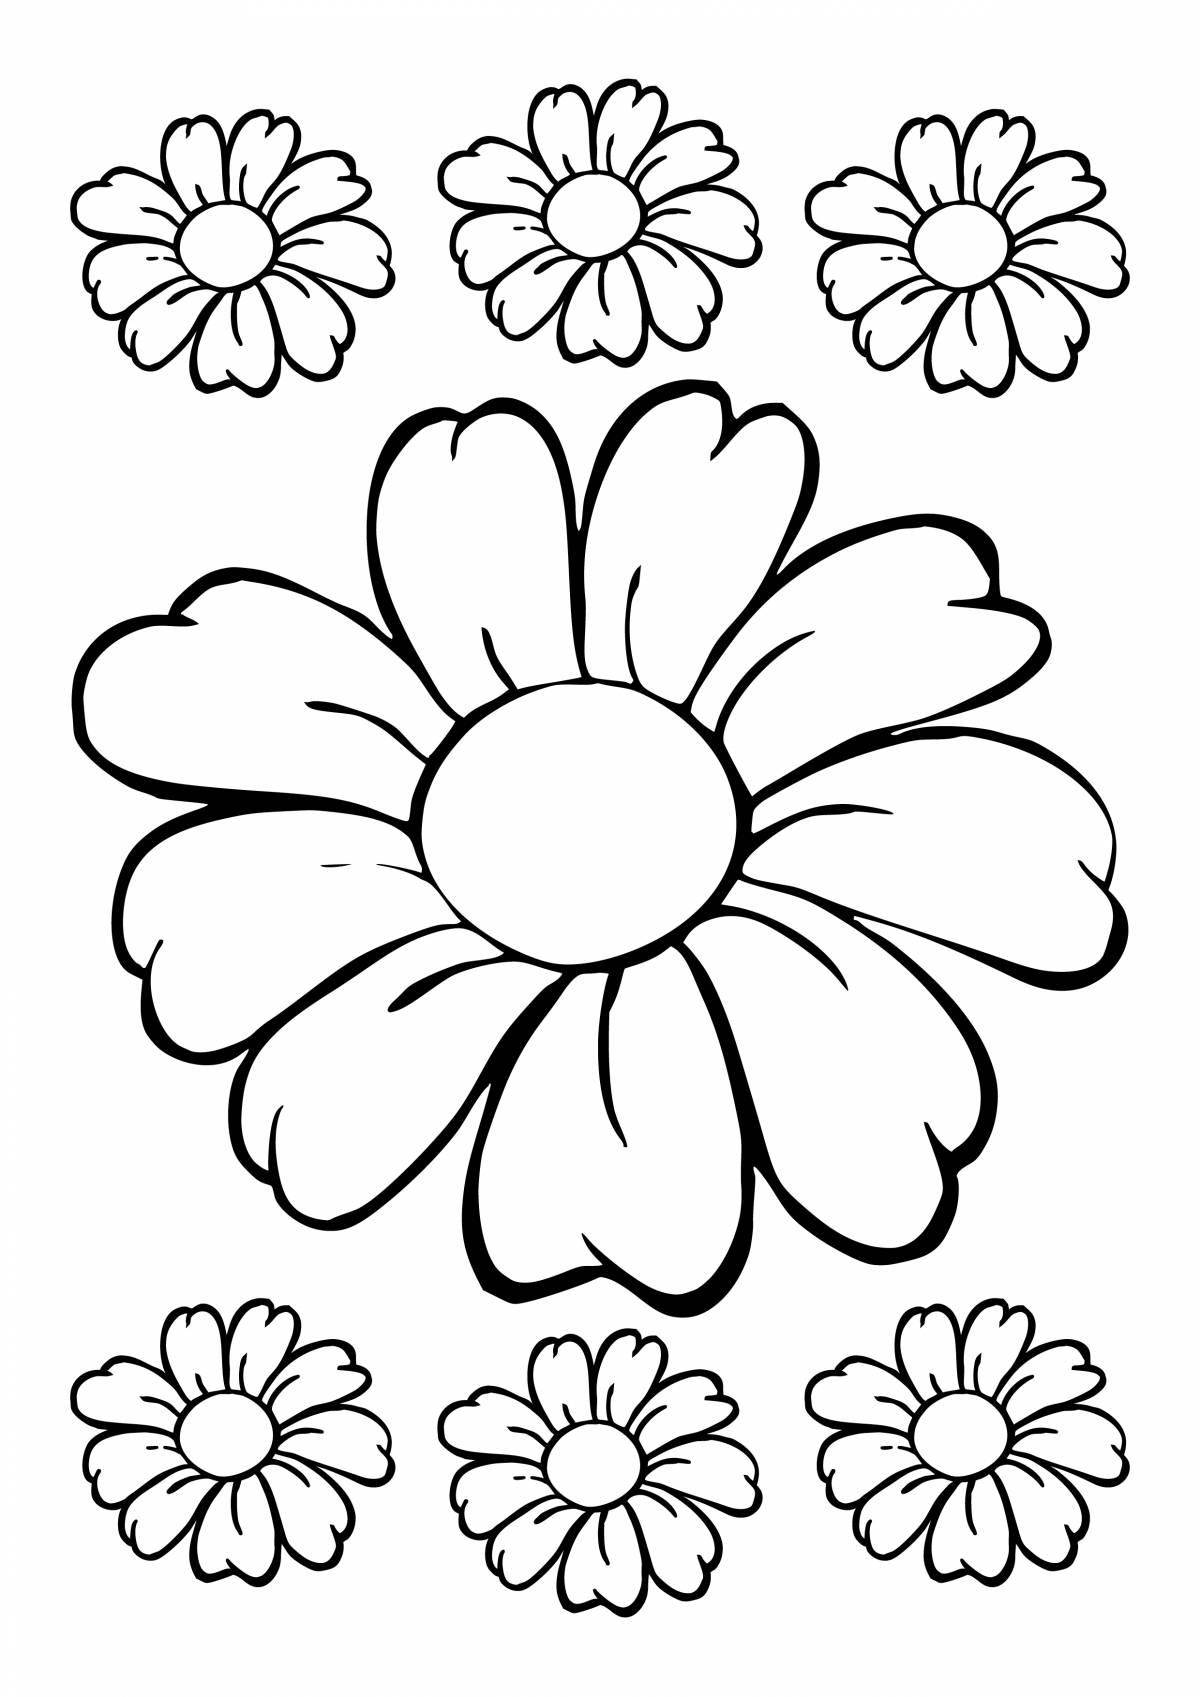 Coloring book shiny chamomile pattern